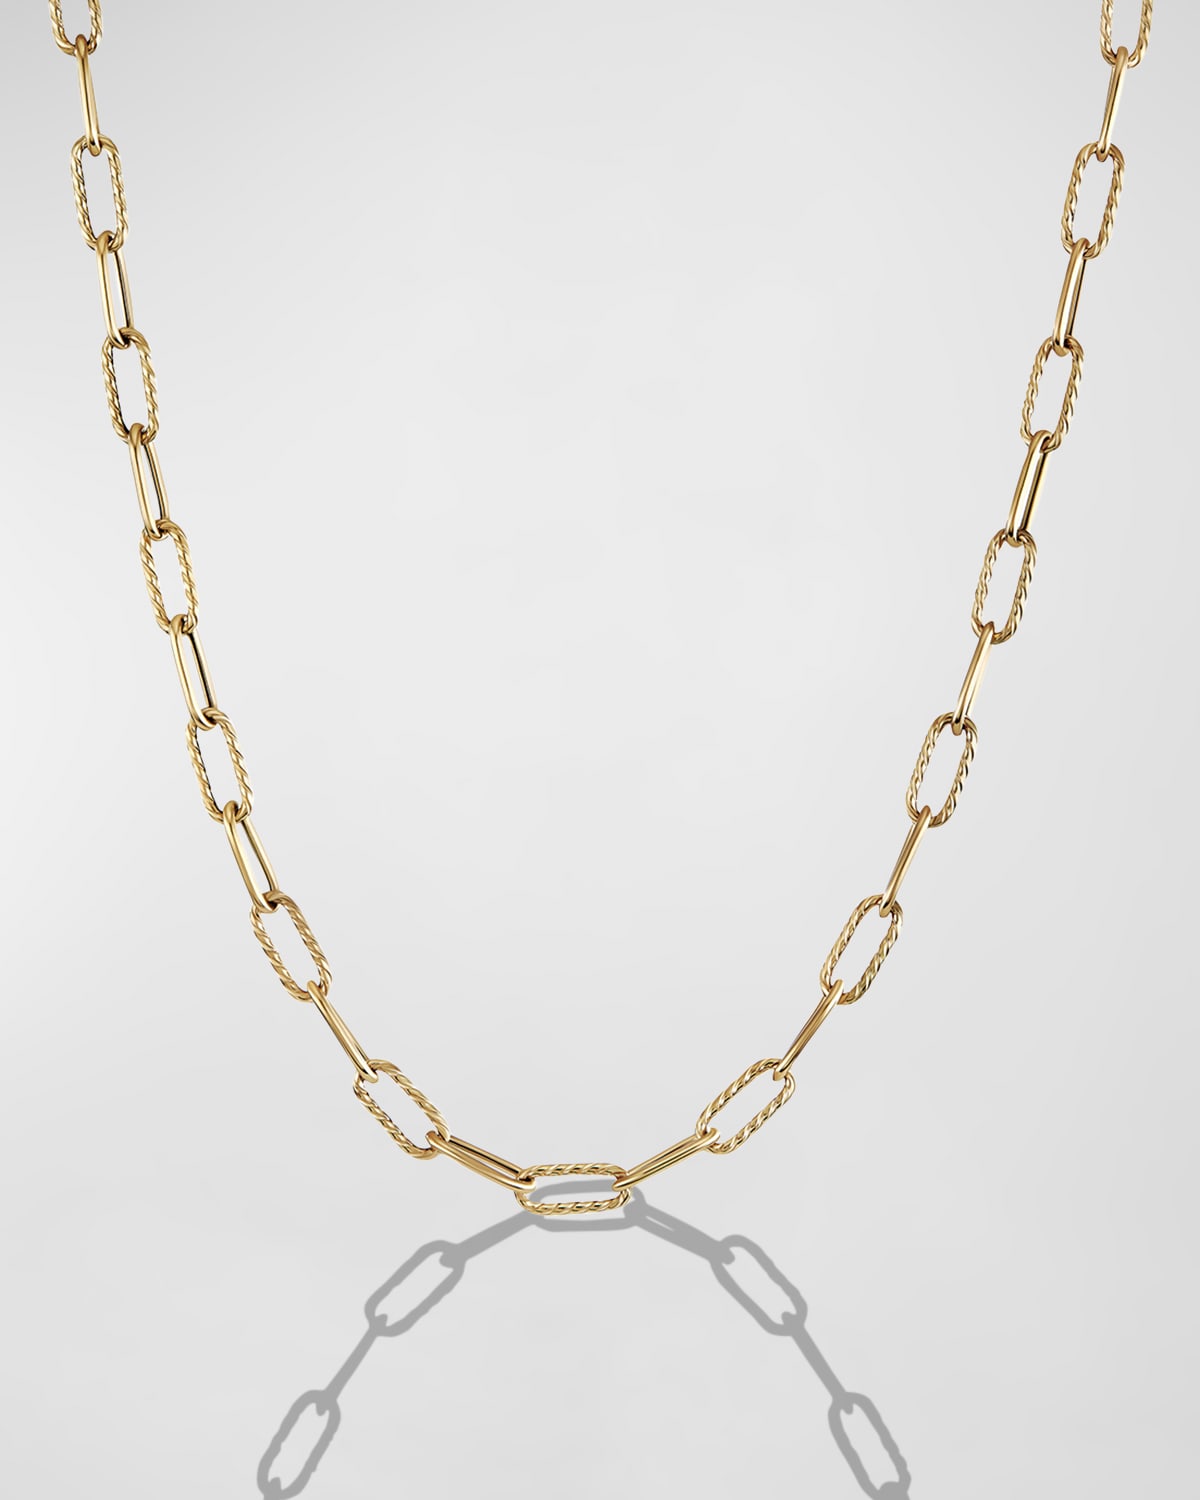 DAVID YURMAN DY MADISON TOGGLE CHAIN NECKLACE IN 18K GOLD, 4MM, 20"L